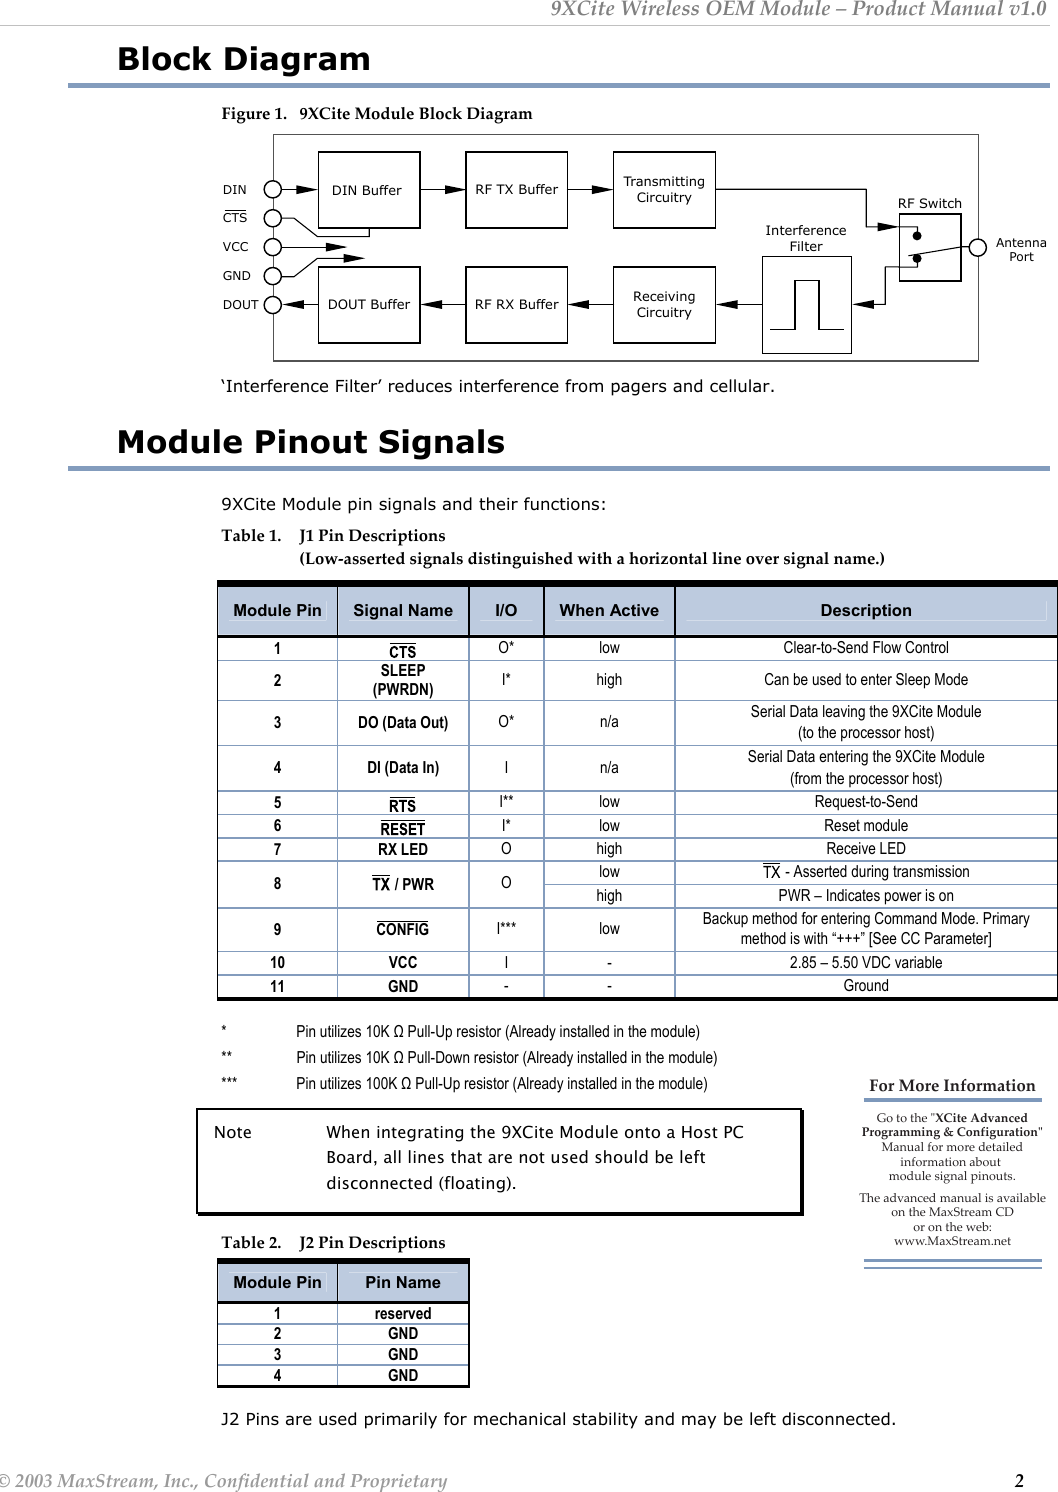 9XCite Wireless OEM Module – Product Manual v1.0 Block Diagram Figure 1.  9XCite Module Block Diagram  InterferenceFilterRF TX Buffer TransmittingCircuitryRF RX Buffer ReceivingCircuitryRF SwitchDIN BufferAntennaPortDINDOUTGNDVCCCTSDOUT Buffer       ‘Interference Filter’ reduces interference from pagers and cellular. Module Pinout Signals 9XCite Module pin signals and their functions: Table 1.  J1 Pin Descriptions    (Low-asserted signals distinguished with a horizontal line over signal name.)  Module Pin  Signal Name  I/O  When Active  Description 1   O* low  Clear-to-Send Flow Control 2  SLEEP (PWRDN)  I*  high  Can be used to enter Sleep Mode 3  DO (Data Out)  O* n/a  Serial Data leaving the 9XCite Module  (to the processor host)  4 DI (Data In) I n/a  Serial Data entering the 9XCite Module (from the processor host) 5   I** low  Request-to-Send 6   I* low  Reset module 7 RX LED O high  Receive LED low   - Asserted during transmission 8   / PWR  O  high  PWR – Indicates power is on 9 CONFIG I*** low Backup method for entering Command Mode. Primary method is with “+++” [See CC Parameter] 10 VCC I  -  2.85 – 5.50 VDC variable 11 GND - -  Ground  *  Pin utilizes 10K Ω Pull-Up resistor (Already installed in the module) **  Pin utilizes 10K Ω Pull-Down resistor (Already installed in the module) ***  Pin utilizes 100K Ω Pull-Up resistor (Already installed in the module) For More InformationGo to the &quot;XCite Advanced Programming &amp; Configuration&quot; Manual for more detailed information about module signal pinouts.The advanced manual is available on the MaxStream CDor on the web: www.MaxStream.net Note    When integrating the 9XCite Module onto a Host PC Board, all lines that are not used should be left disconnected (floating).  Table 2.  J2 Pin Descriptions Module Pin  Pin Name 1 reserved 2 GND 3 GND 4 GND  J2 Pins are used primarily for mechanical stability and may be left disconnected. © 2003 MaxStream, Inc., Confidential and Proprietary                                                                                                                         2 